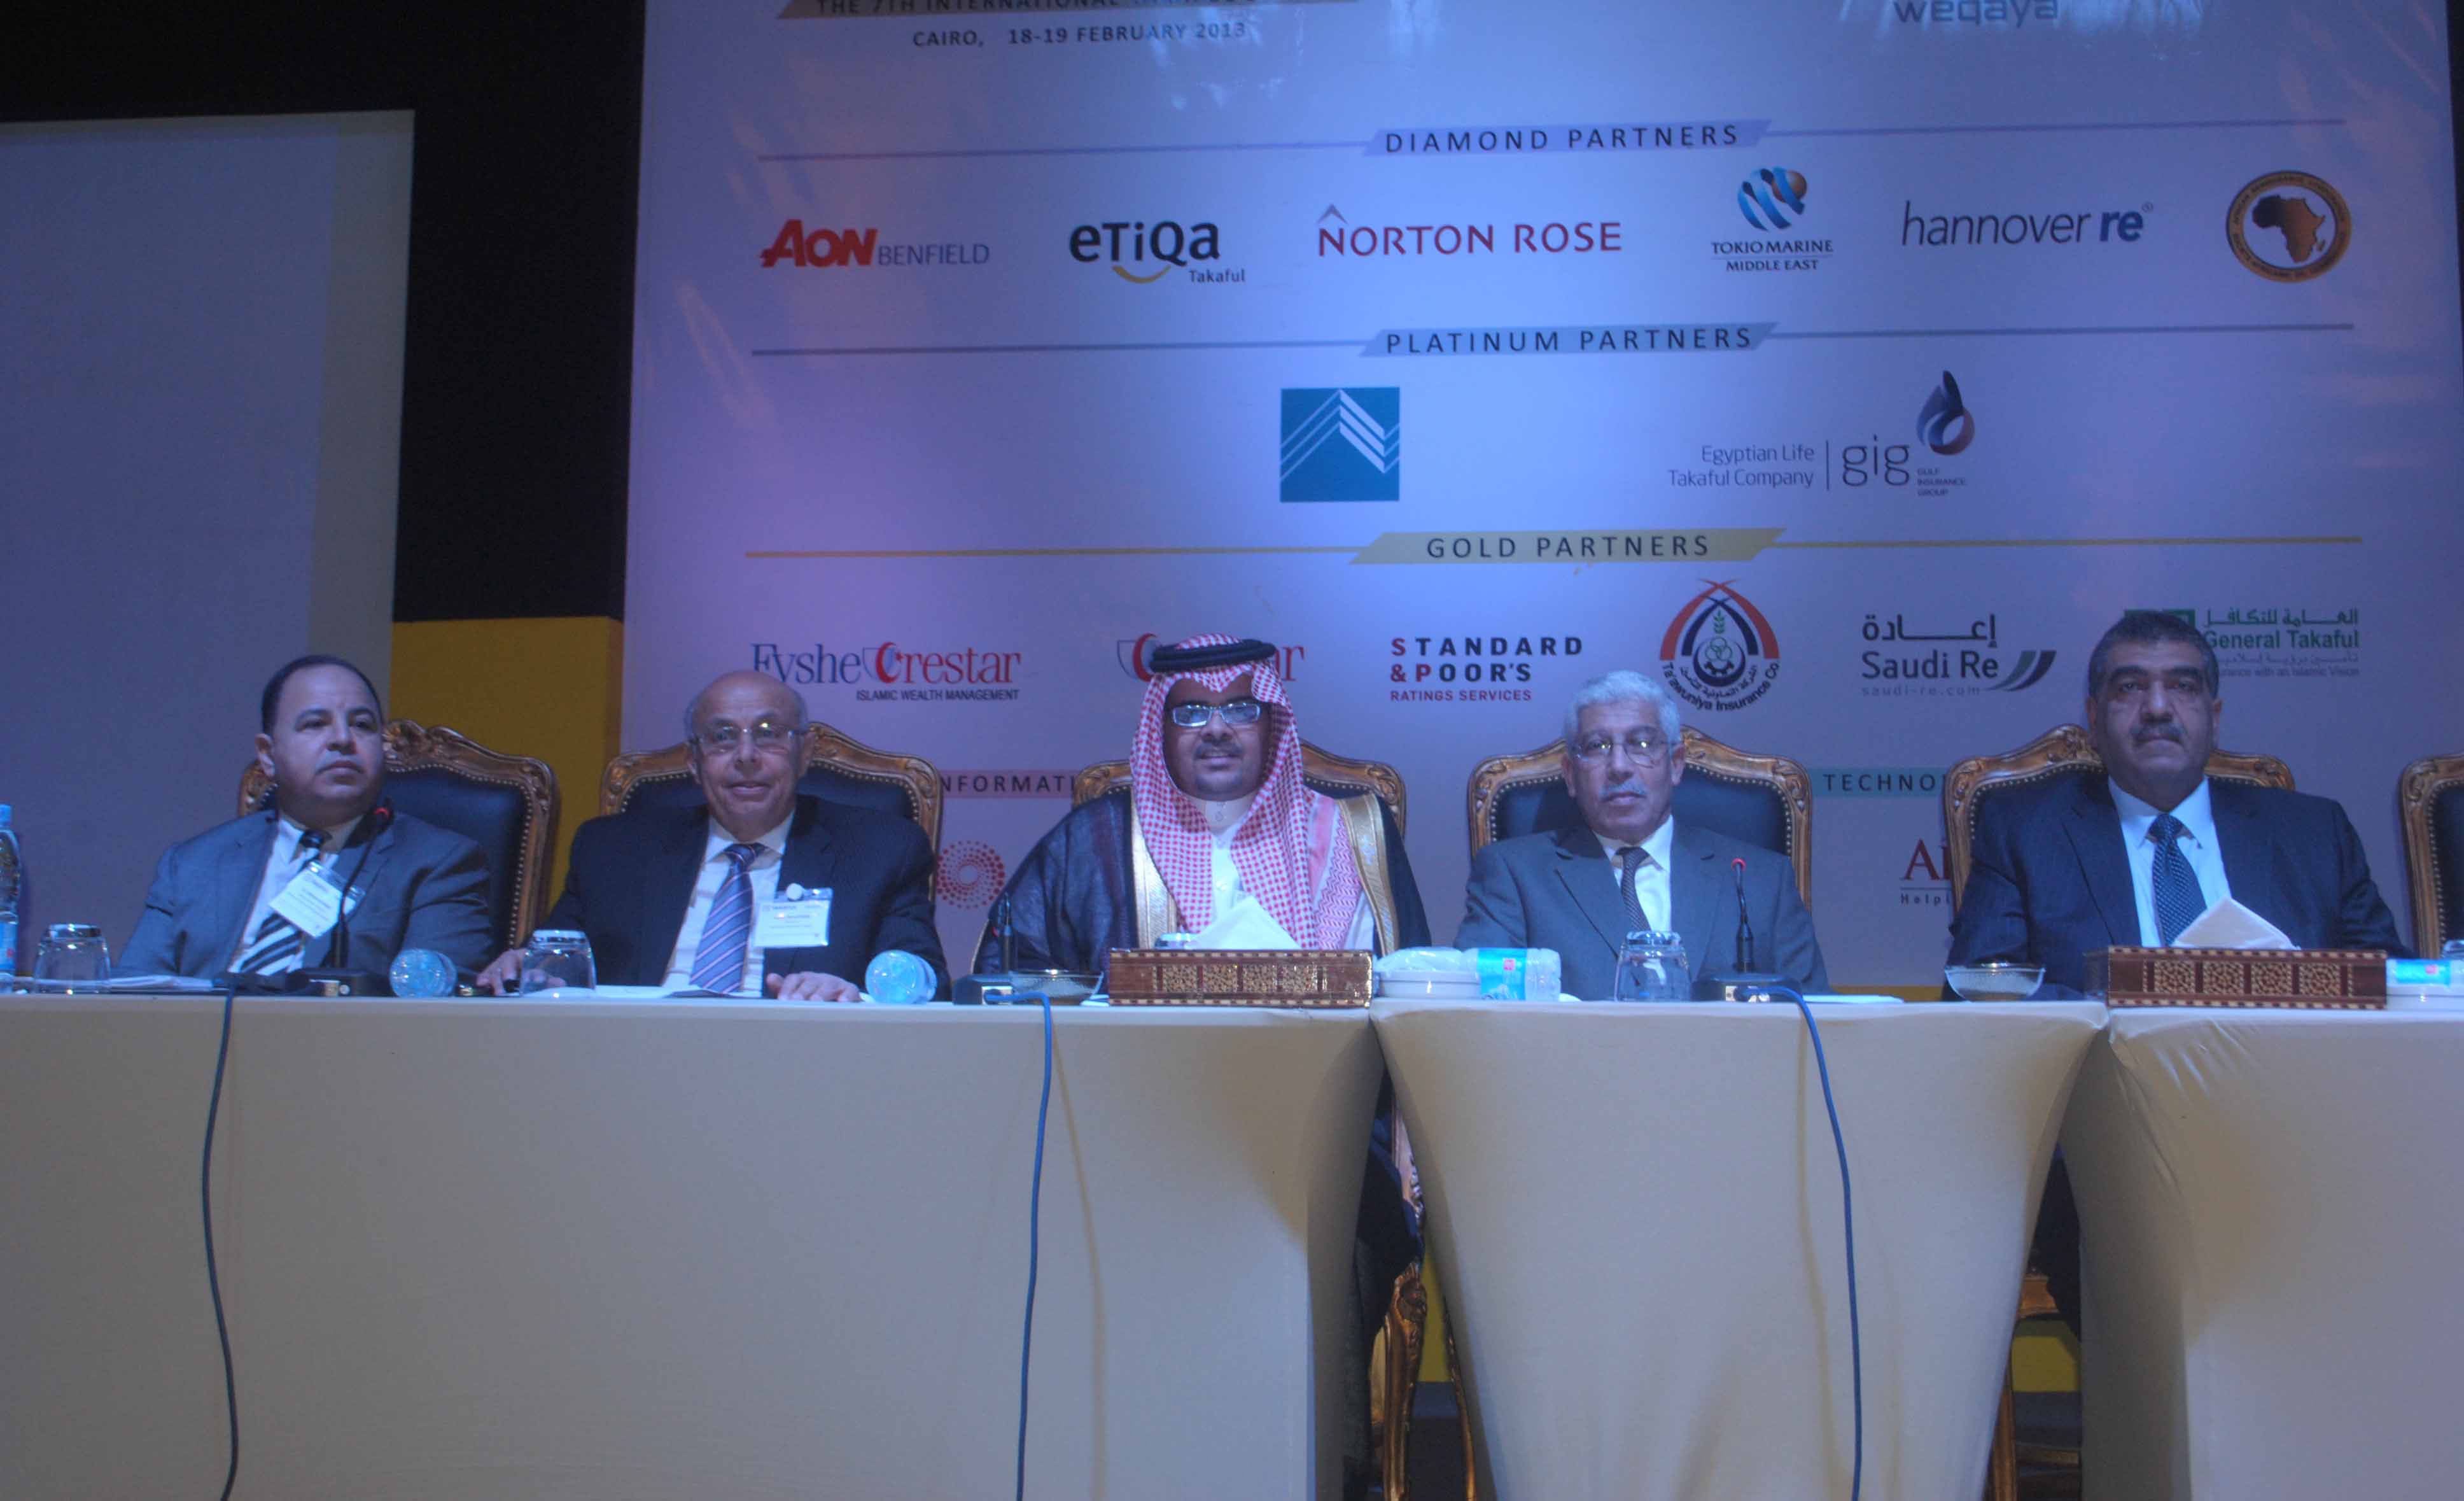 The 7th international Takaful summit's third session today was titled “The Distribution of Takaful Products”, and discussed the importance of creating new distribution channels for takaful products (Photo by Mohamed Omar)